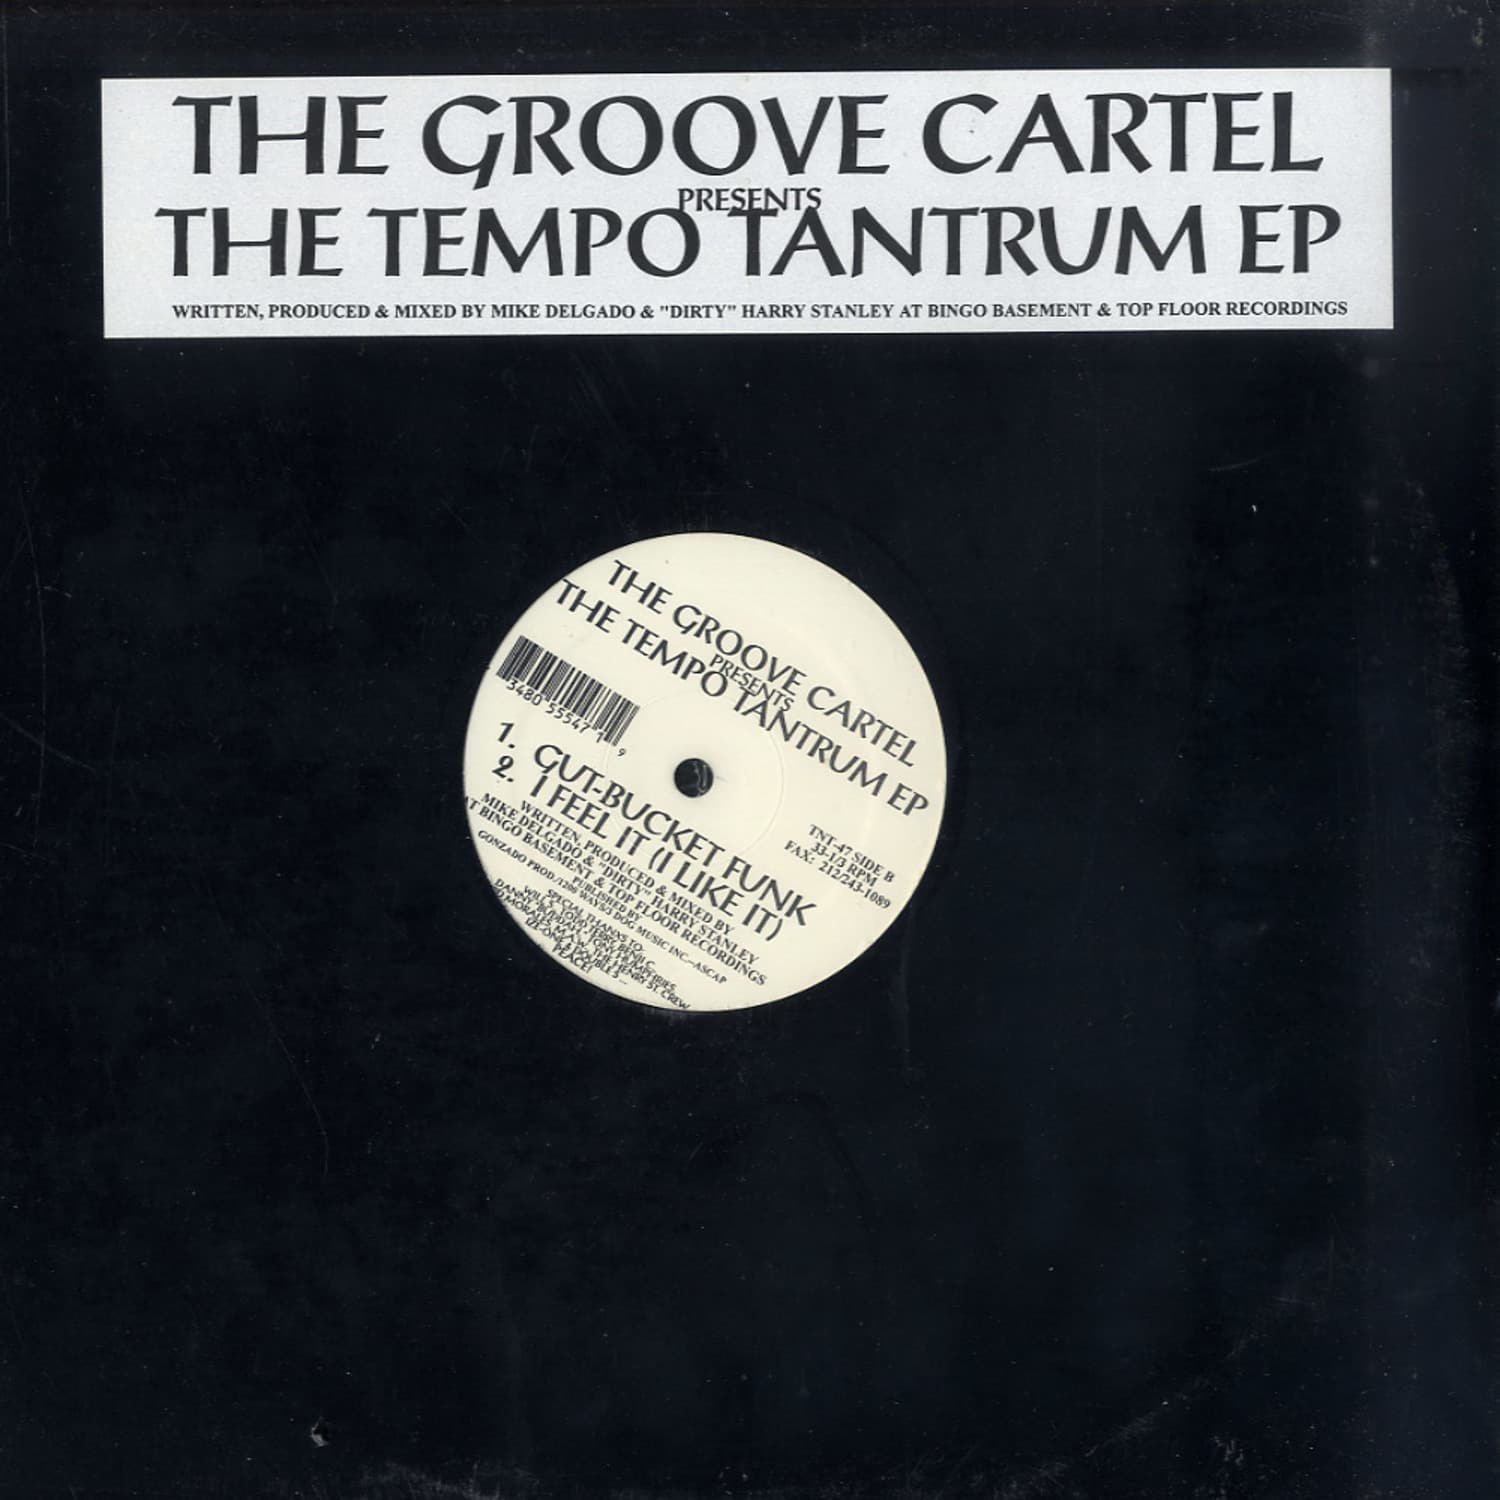 The Groove Cartel  - THE TEMPO TANTRUM EP